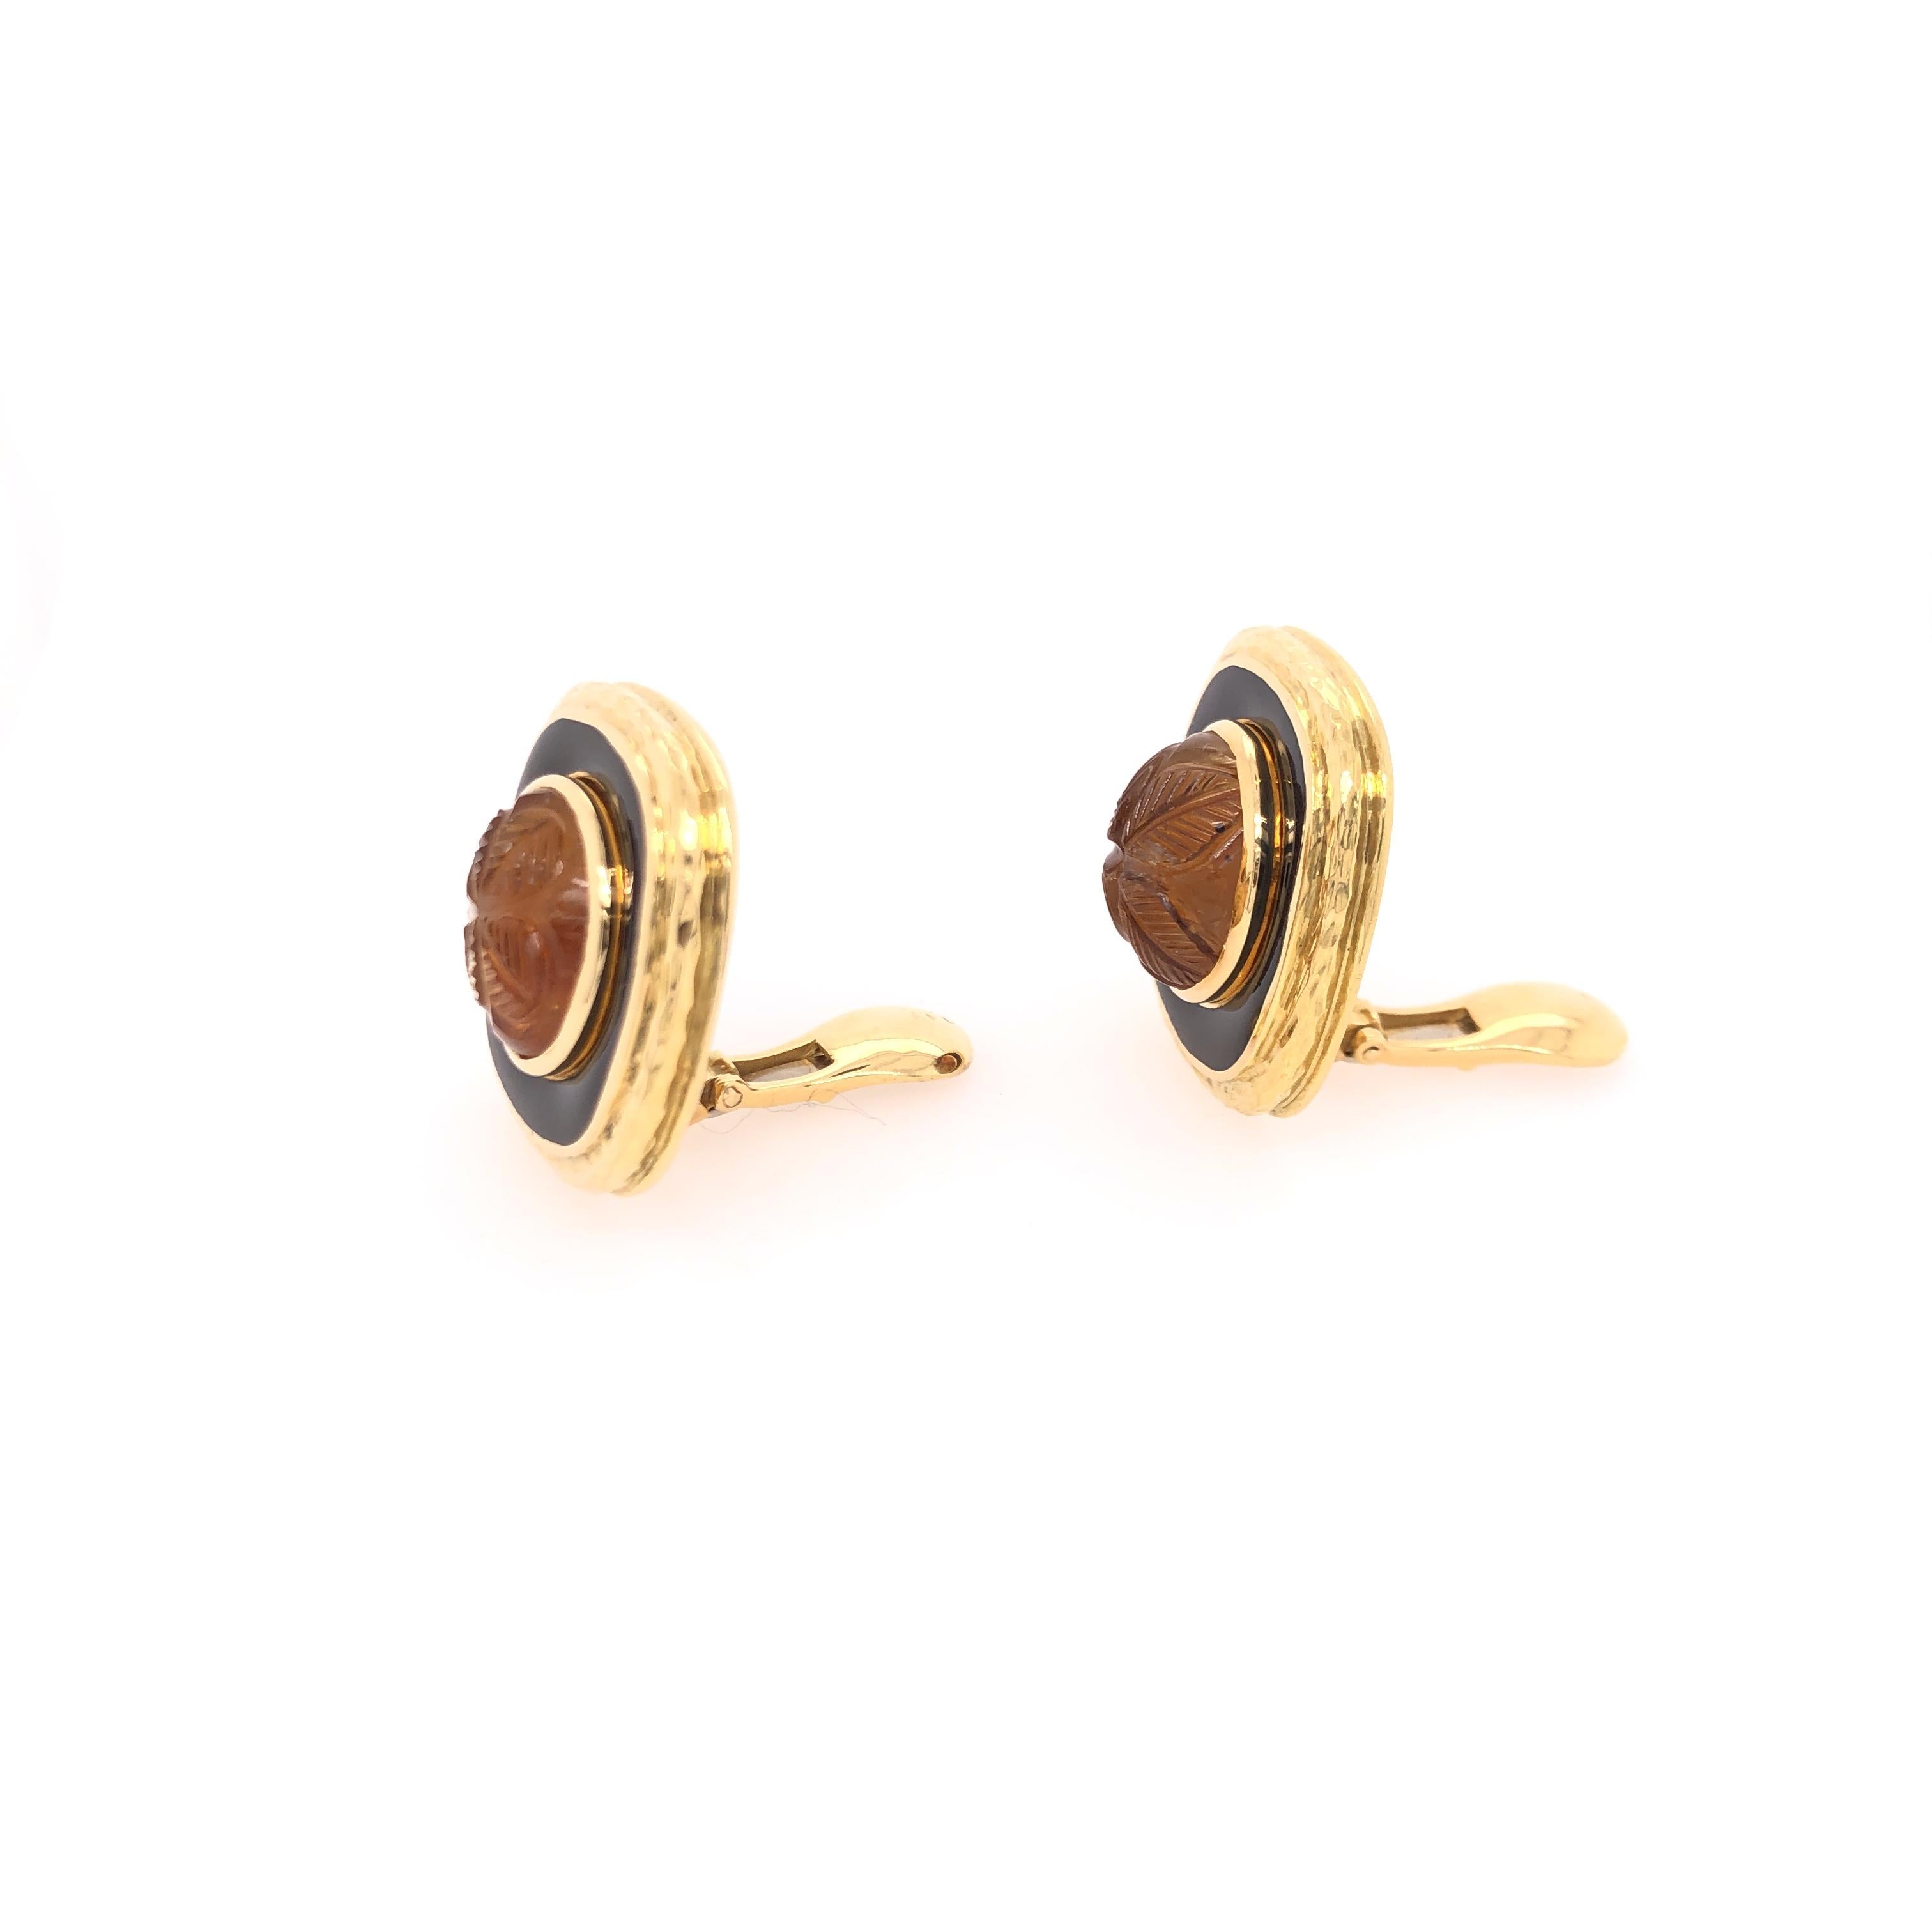 Floral motif carved topaz set in 18K yellow gold and black enamel. Wonderful for everyday wear and business attire. 

From the Skibell Estate Collection 

Stamped: ©WEBB 18K

 